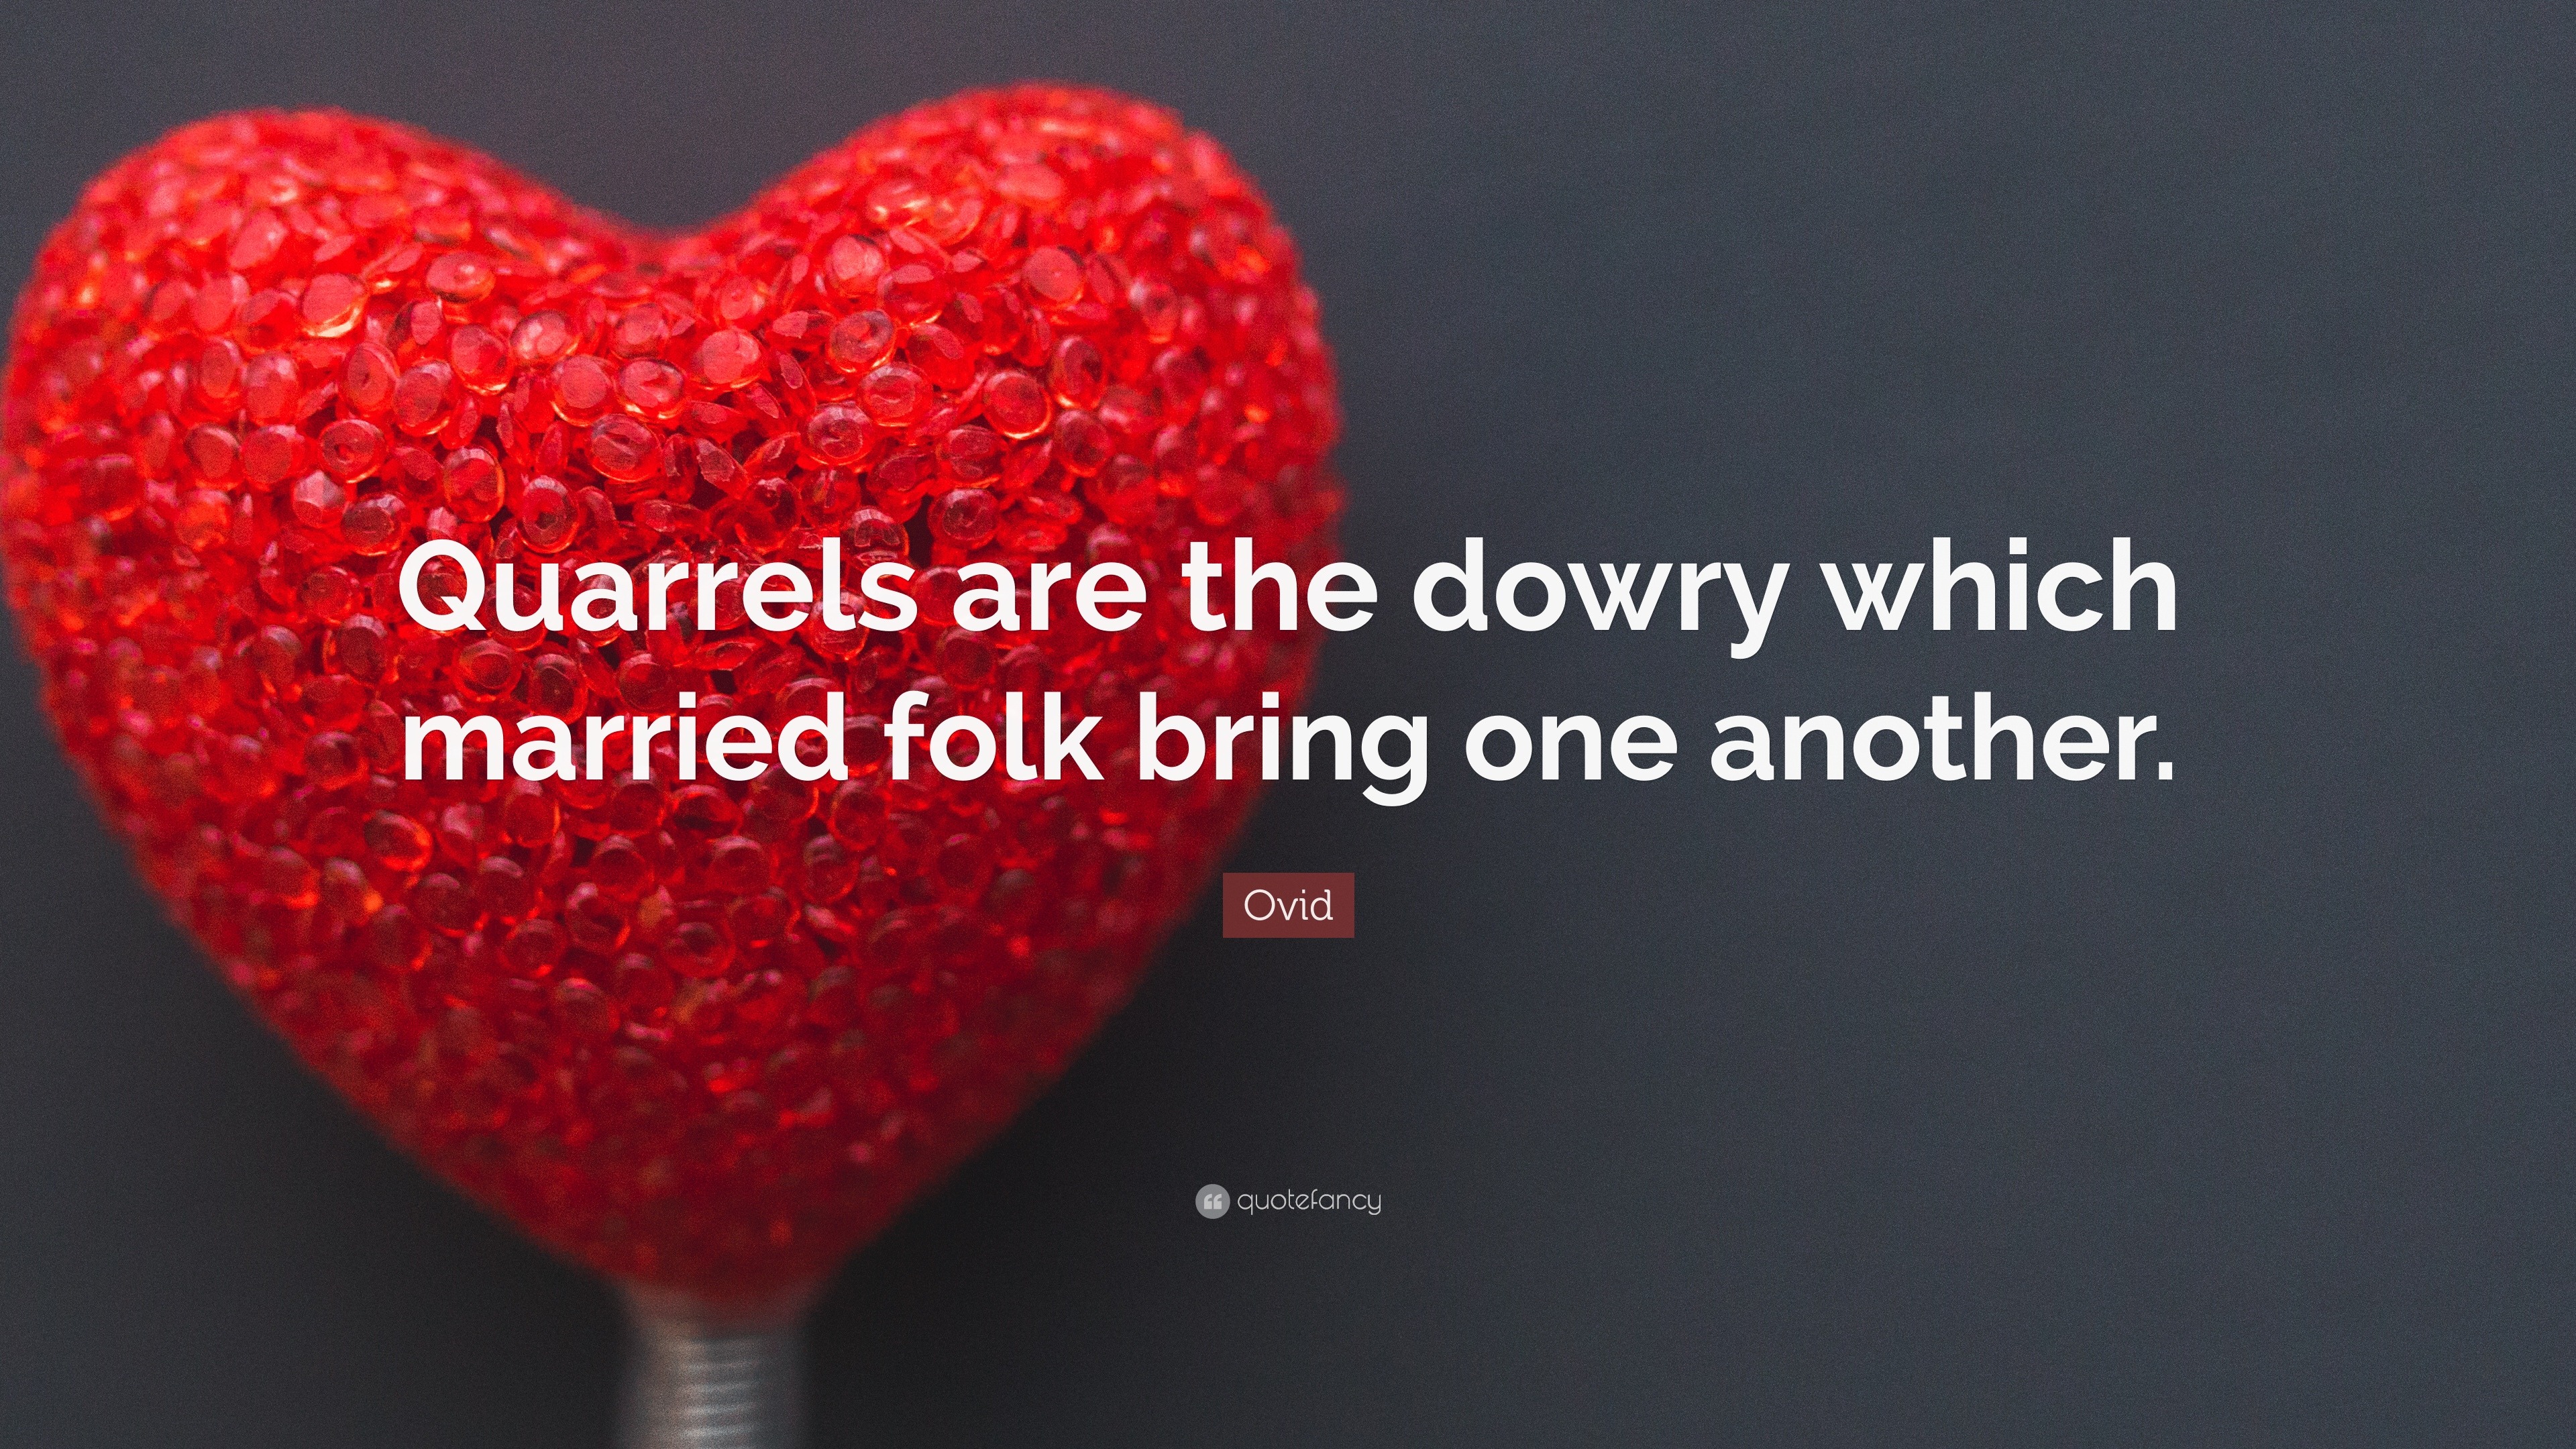 Ovid Quote: "Quarrels are the dowry which married folk ...